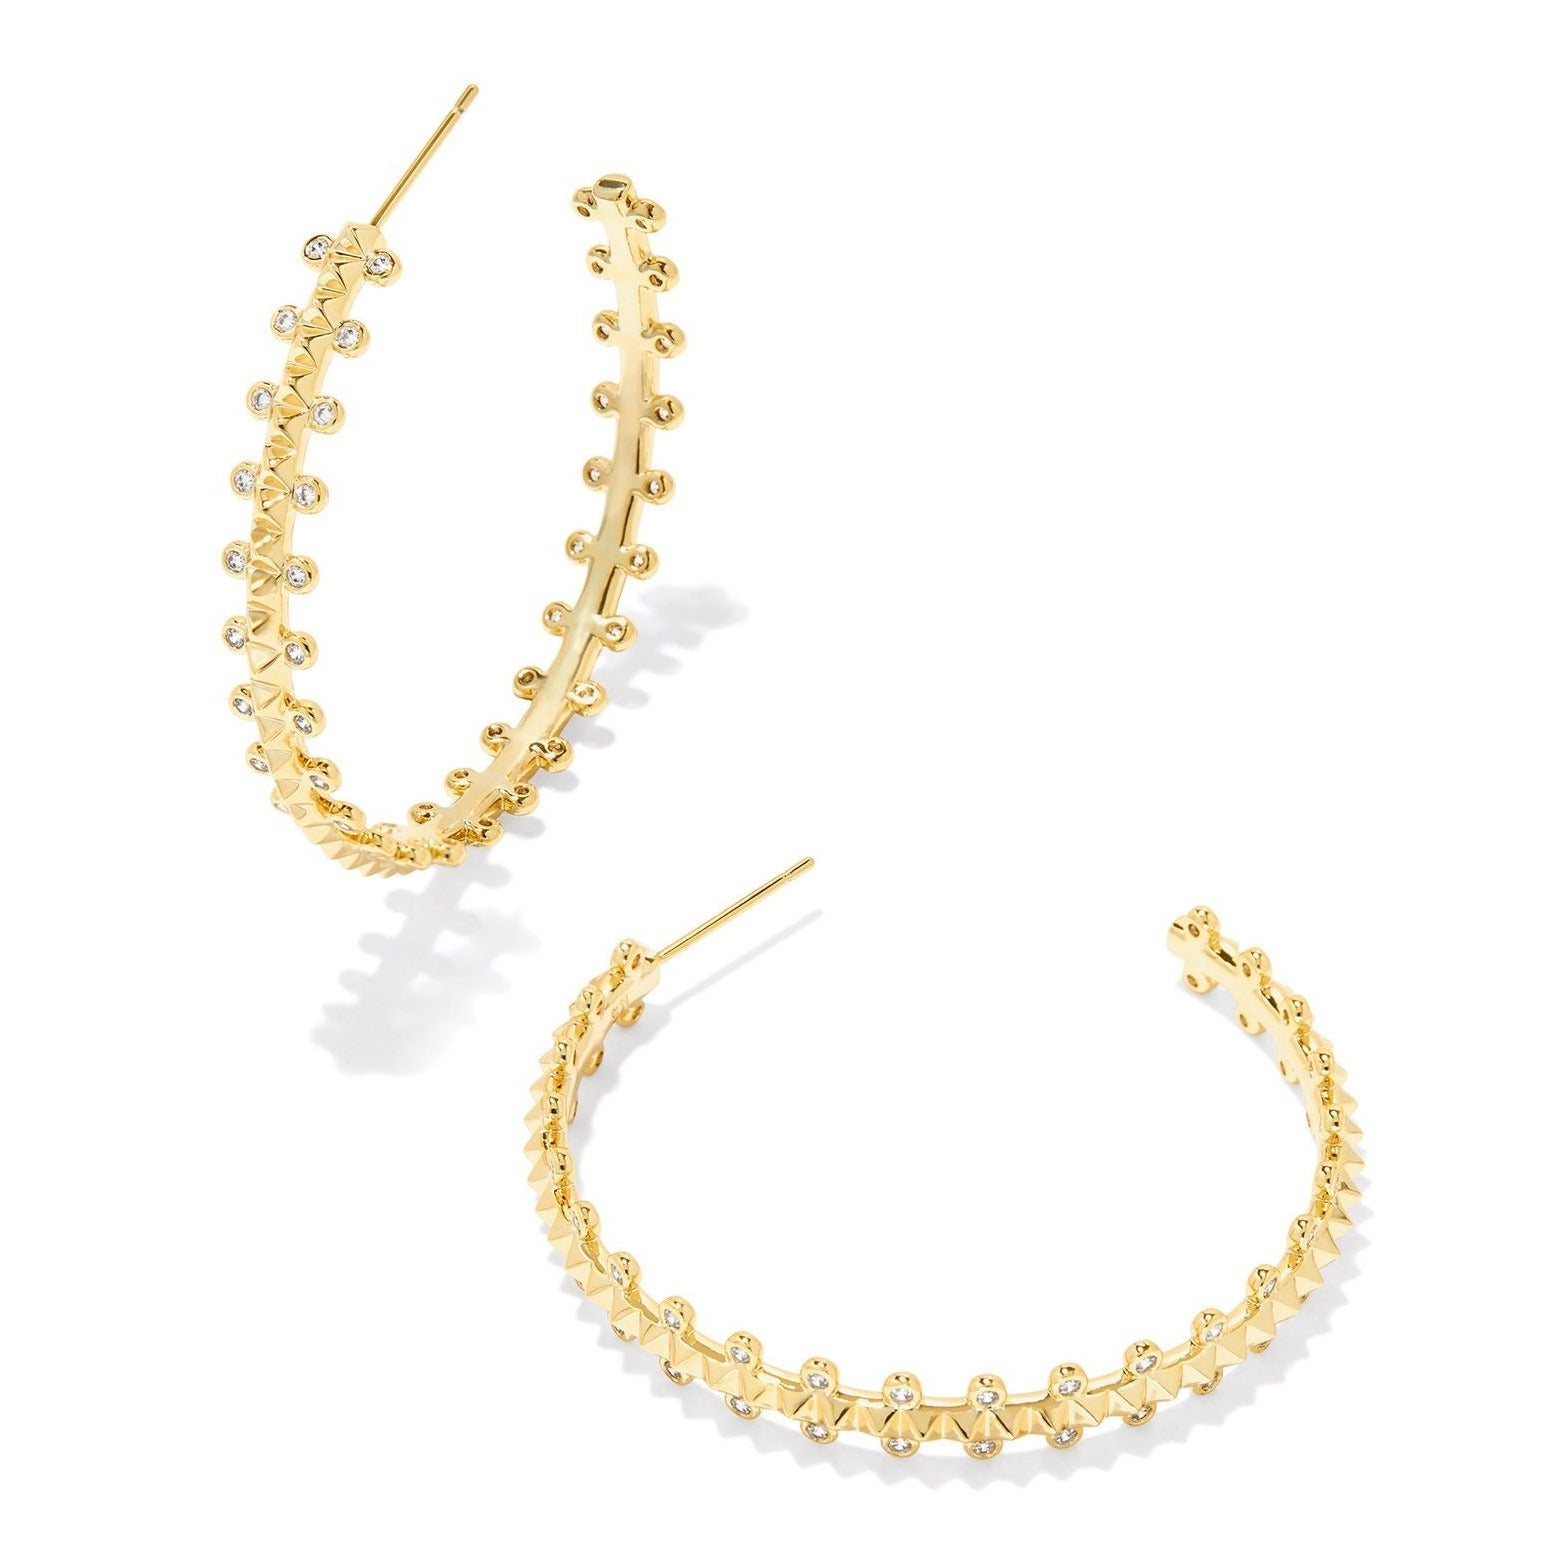 Kendra Scott | Jada Gold Hoop Earrings in White Crystal - Giddy Up Glamour Boutique